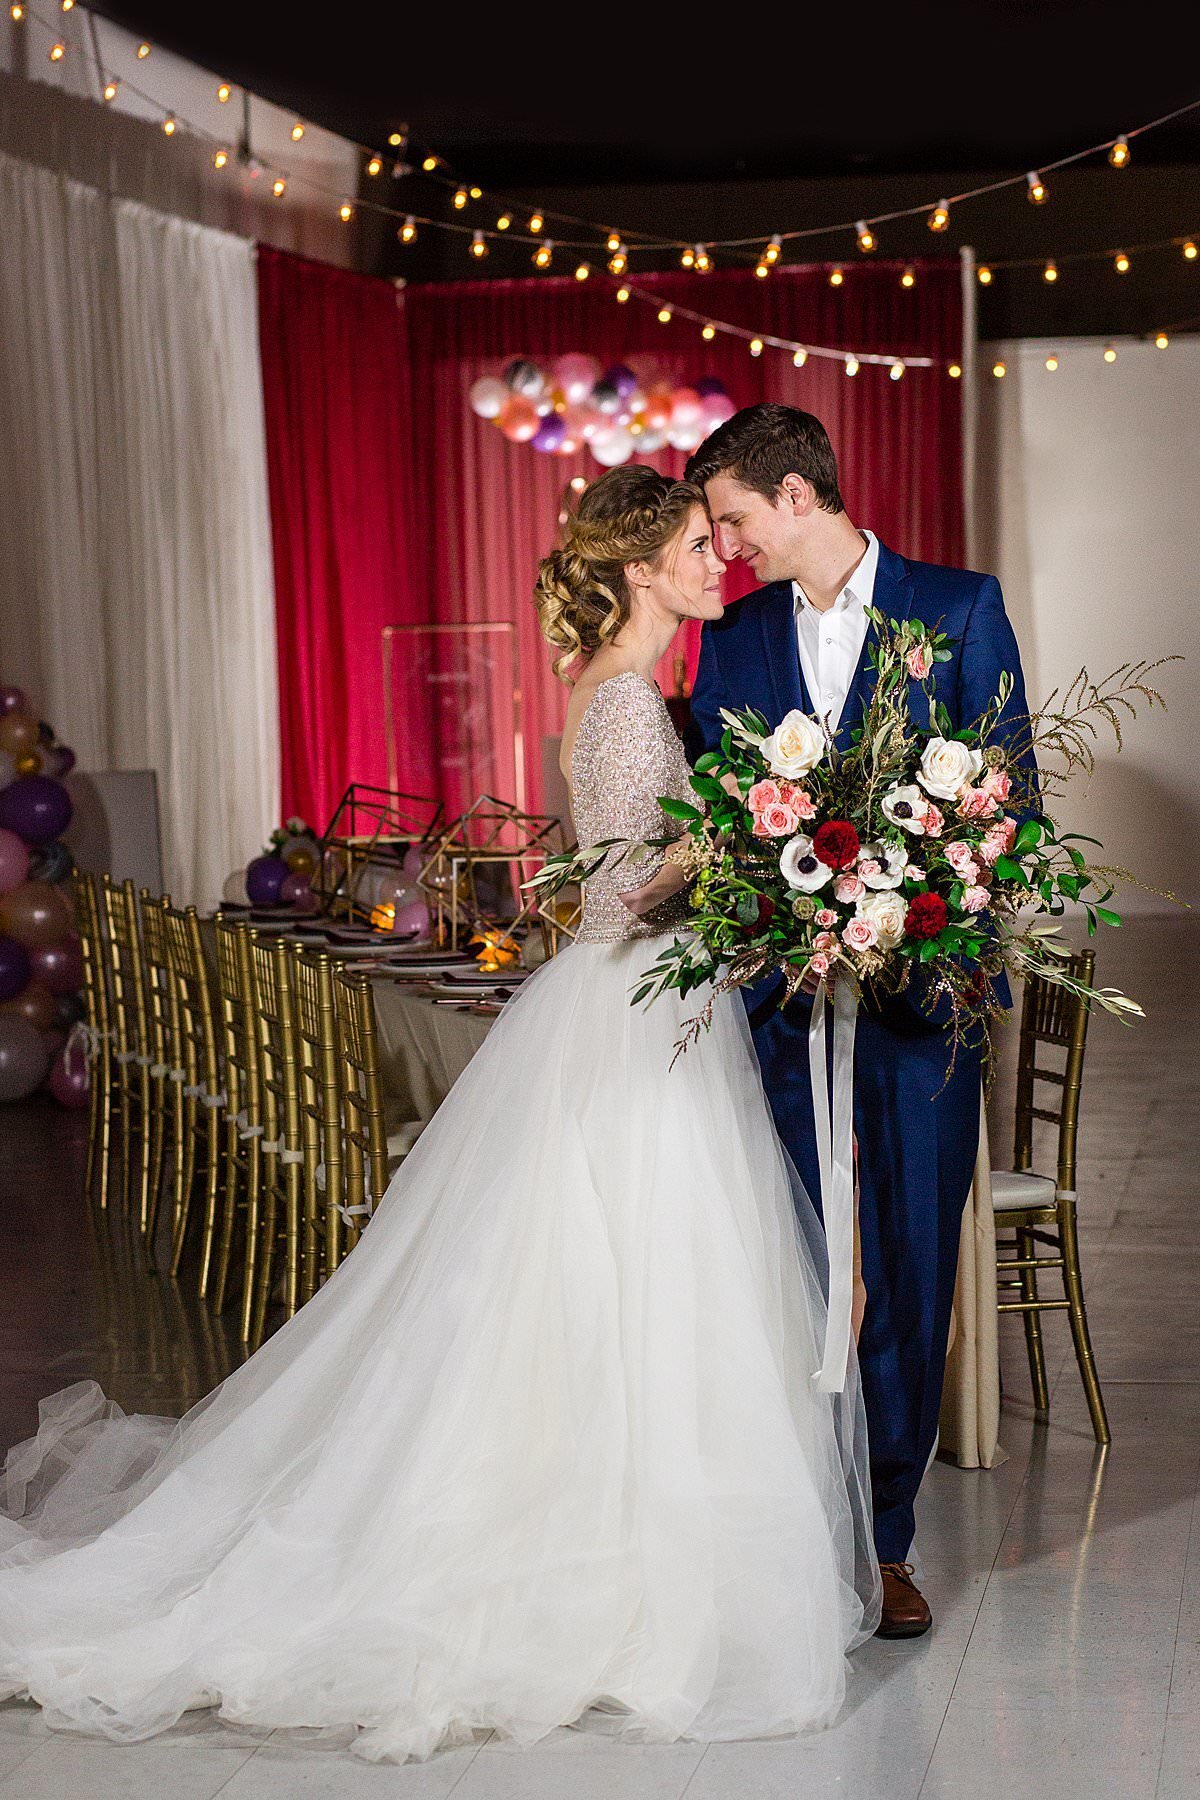 Bride and groom with large bridal bouquet  at reception with white and red drapery and gold chivari chairs